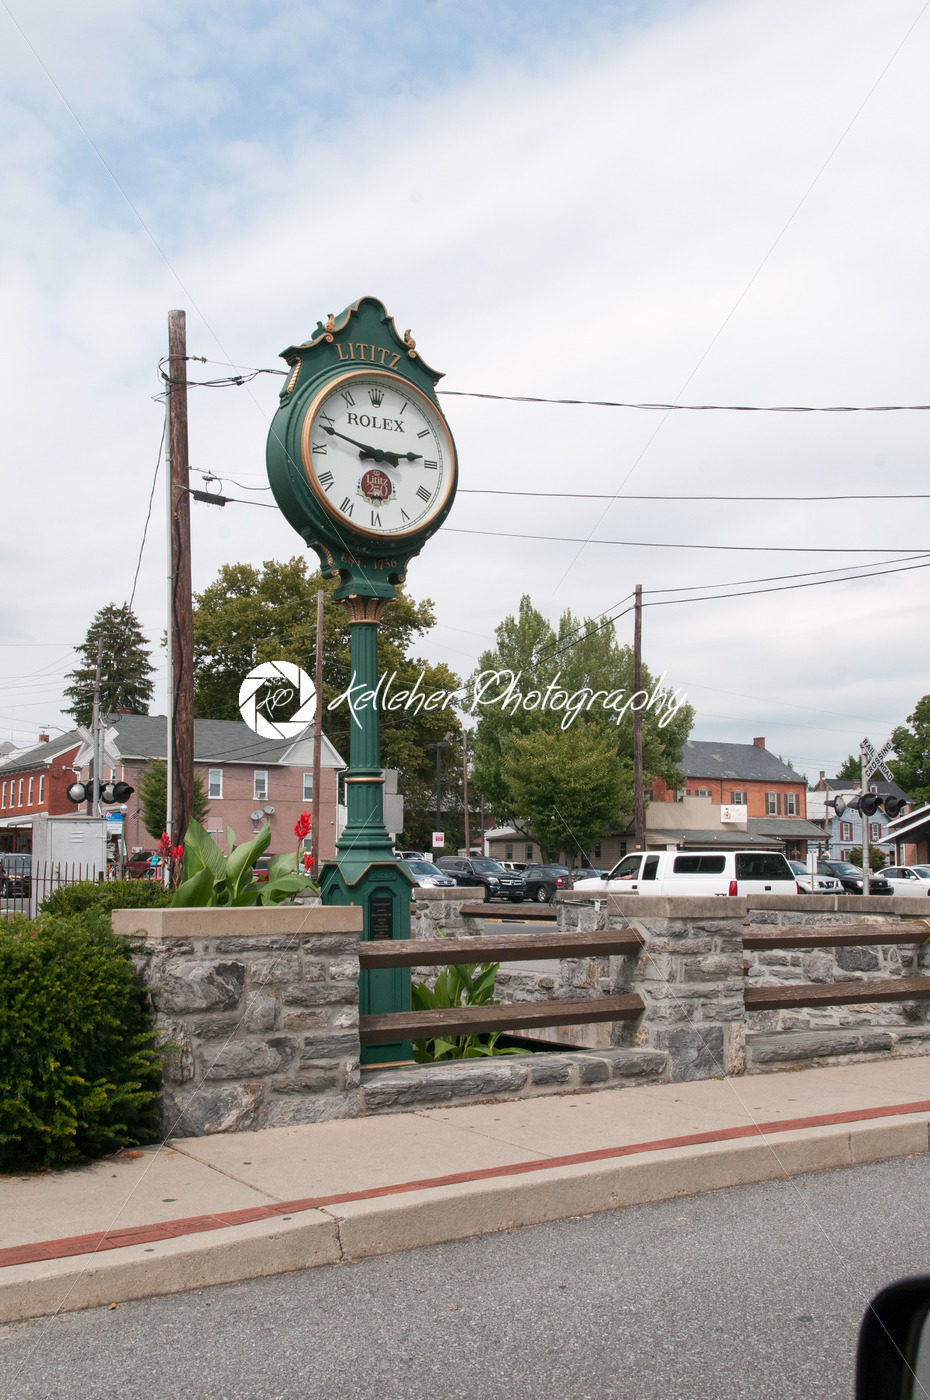 LITITZ, PA – AUGUST 30: Old Lititz Rolex Town Clock on August 30, 2014 - Kelleher Photography Store